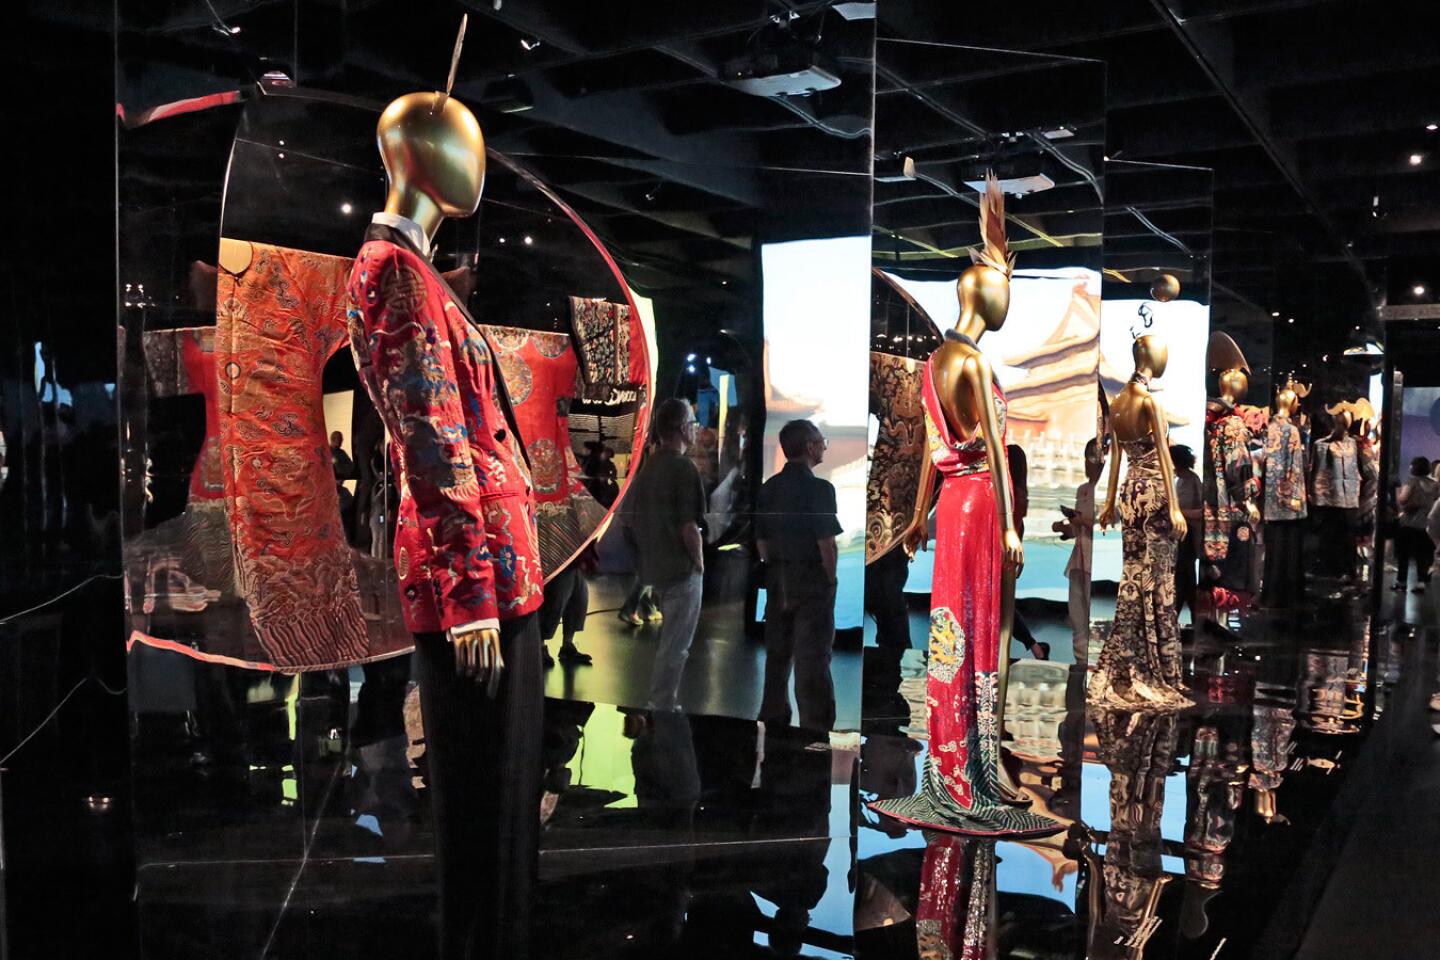 The Art of Selling: Louis Vuitton's Museum-Like Show Courts China Buyers